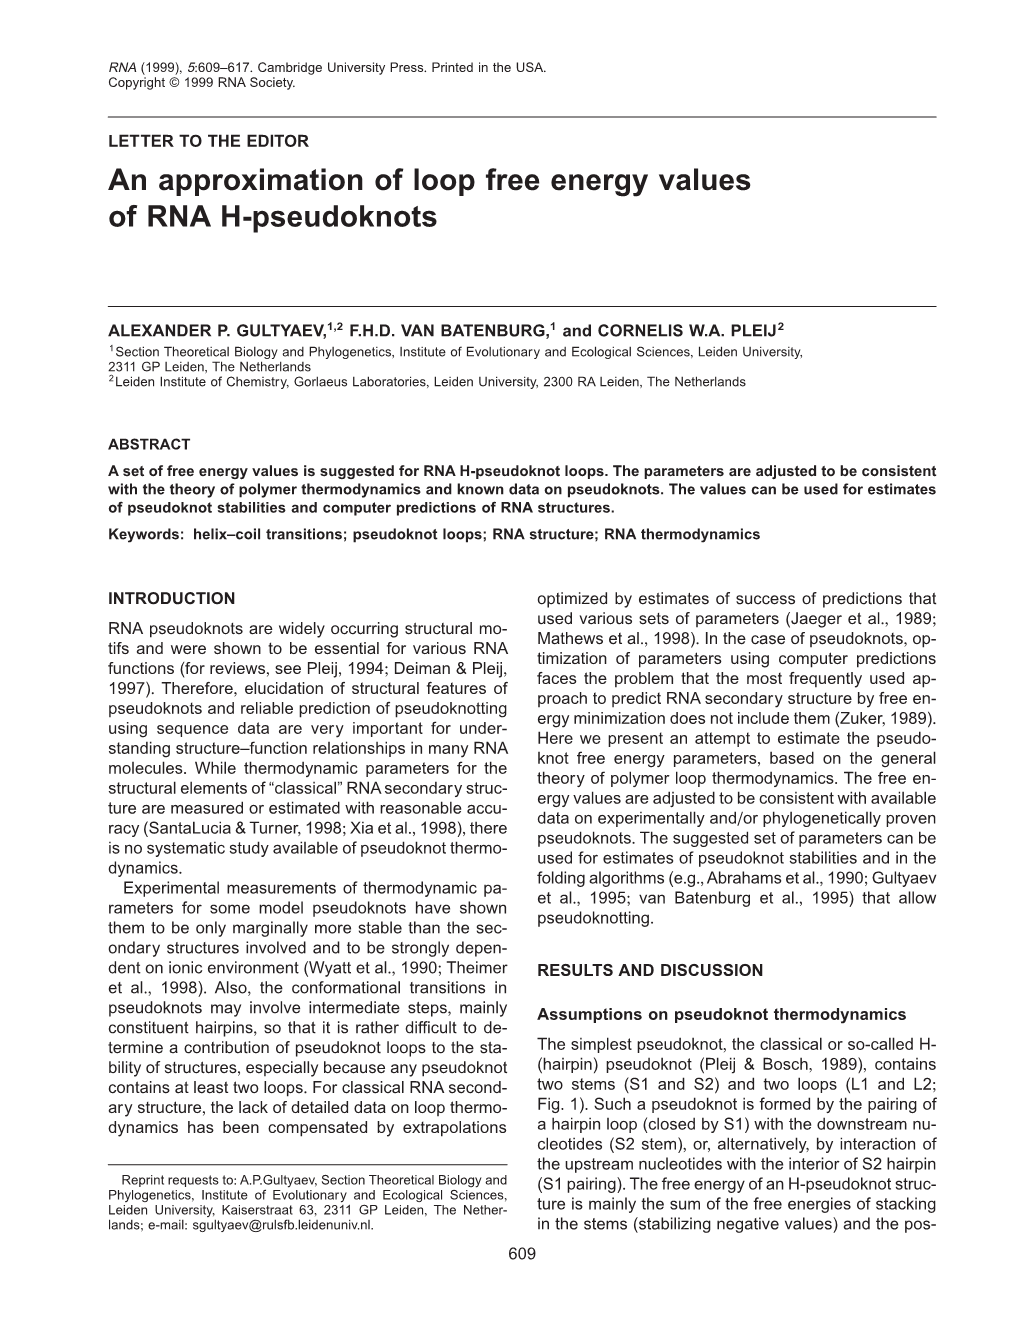 An Approximation of Loop Free Energy Values of RNA H-Pseudoknots